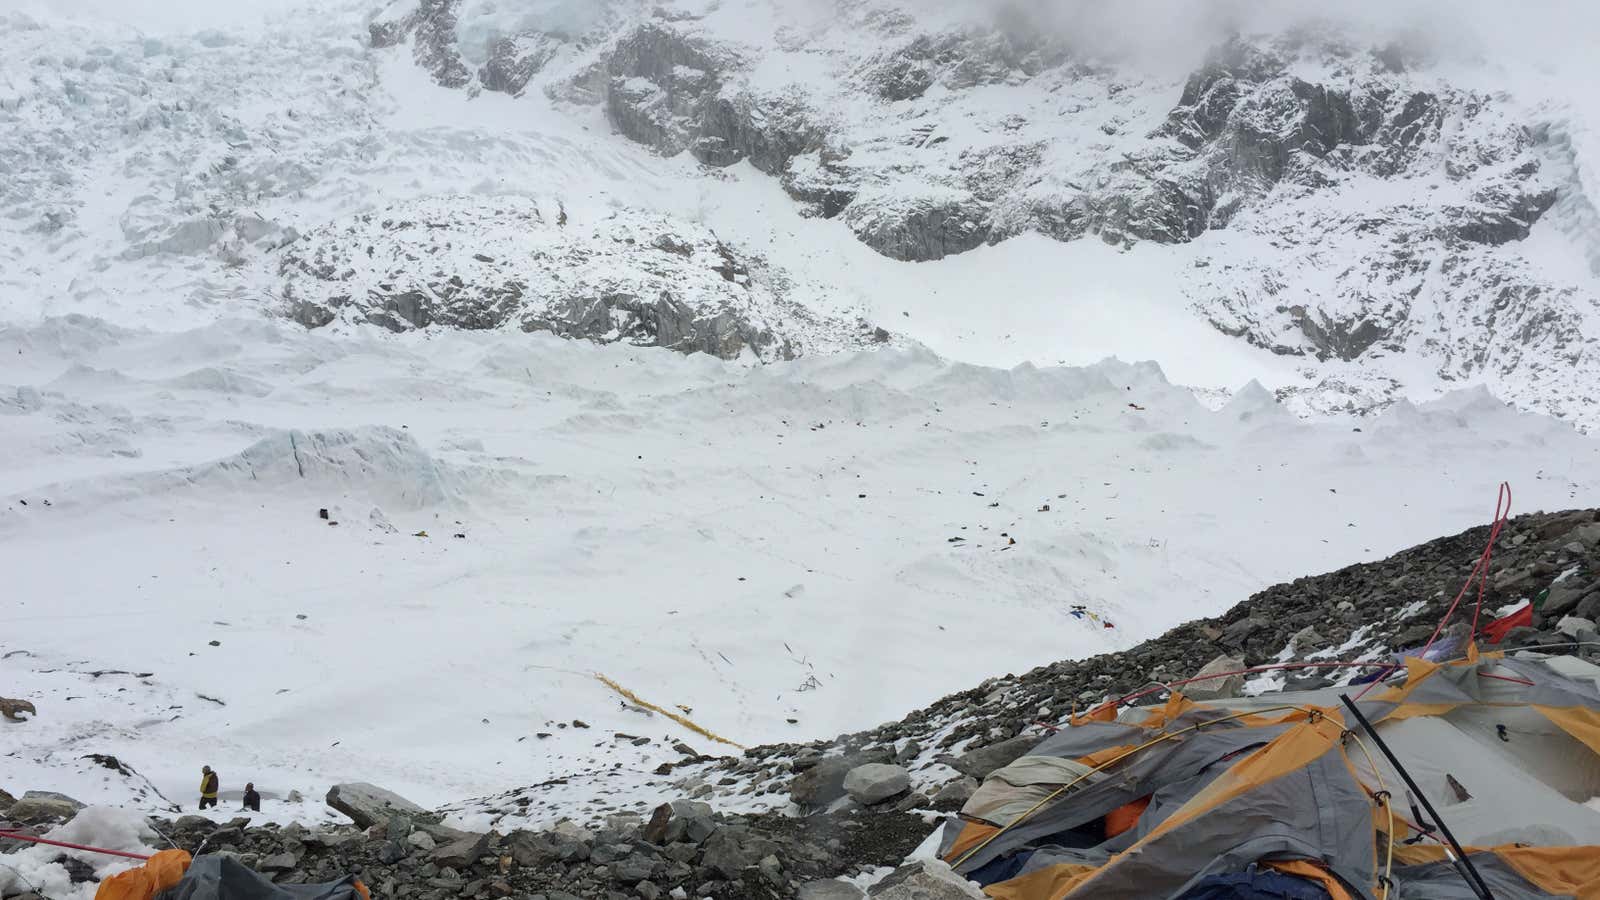 The wind from the avalanche blew debris onto the far reaches of the Khumbu glacier.